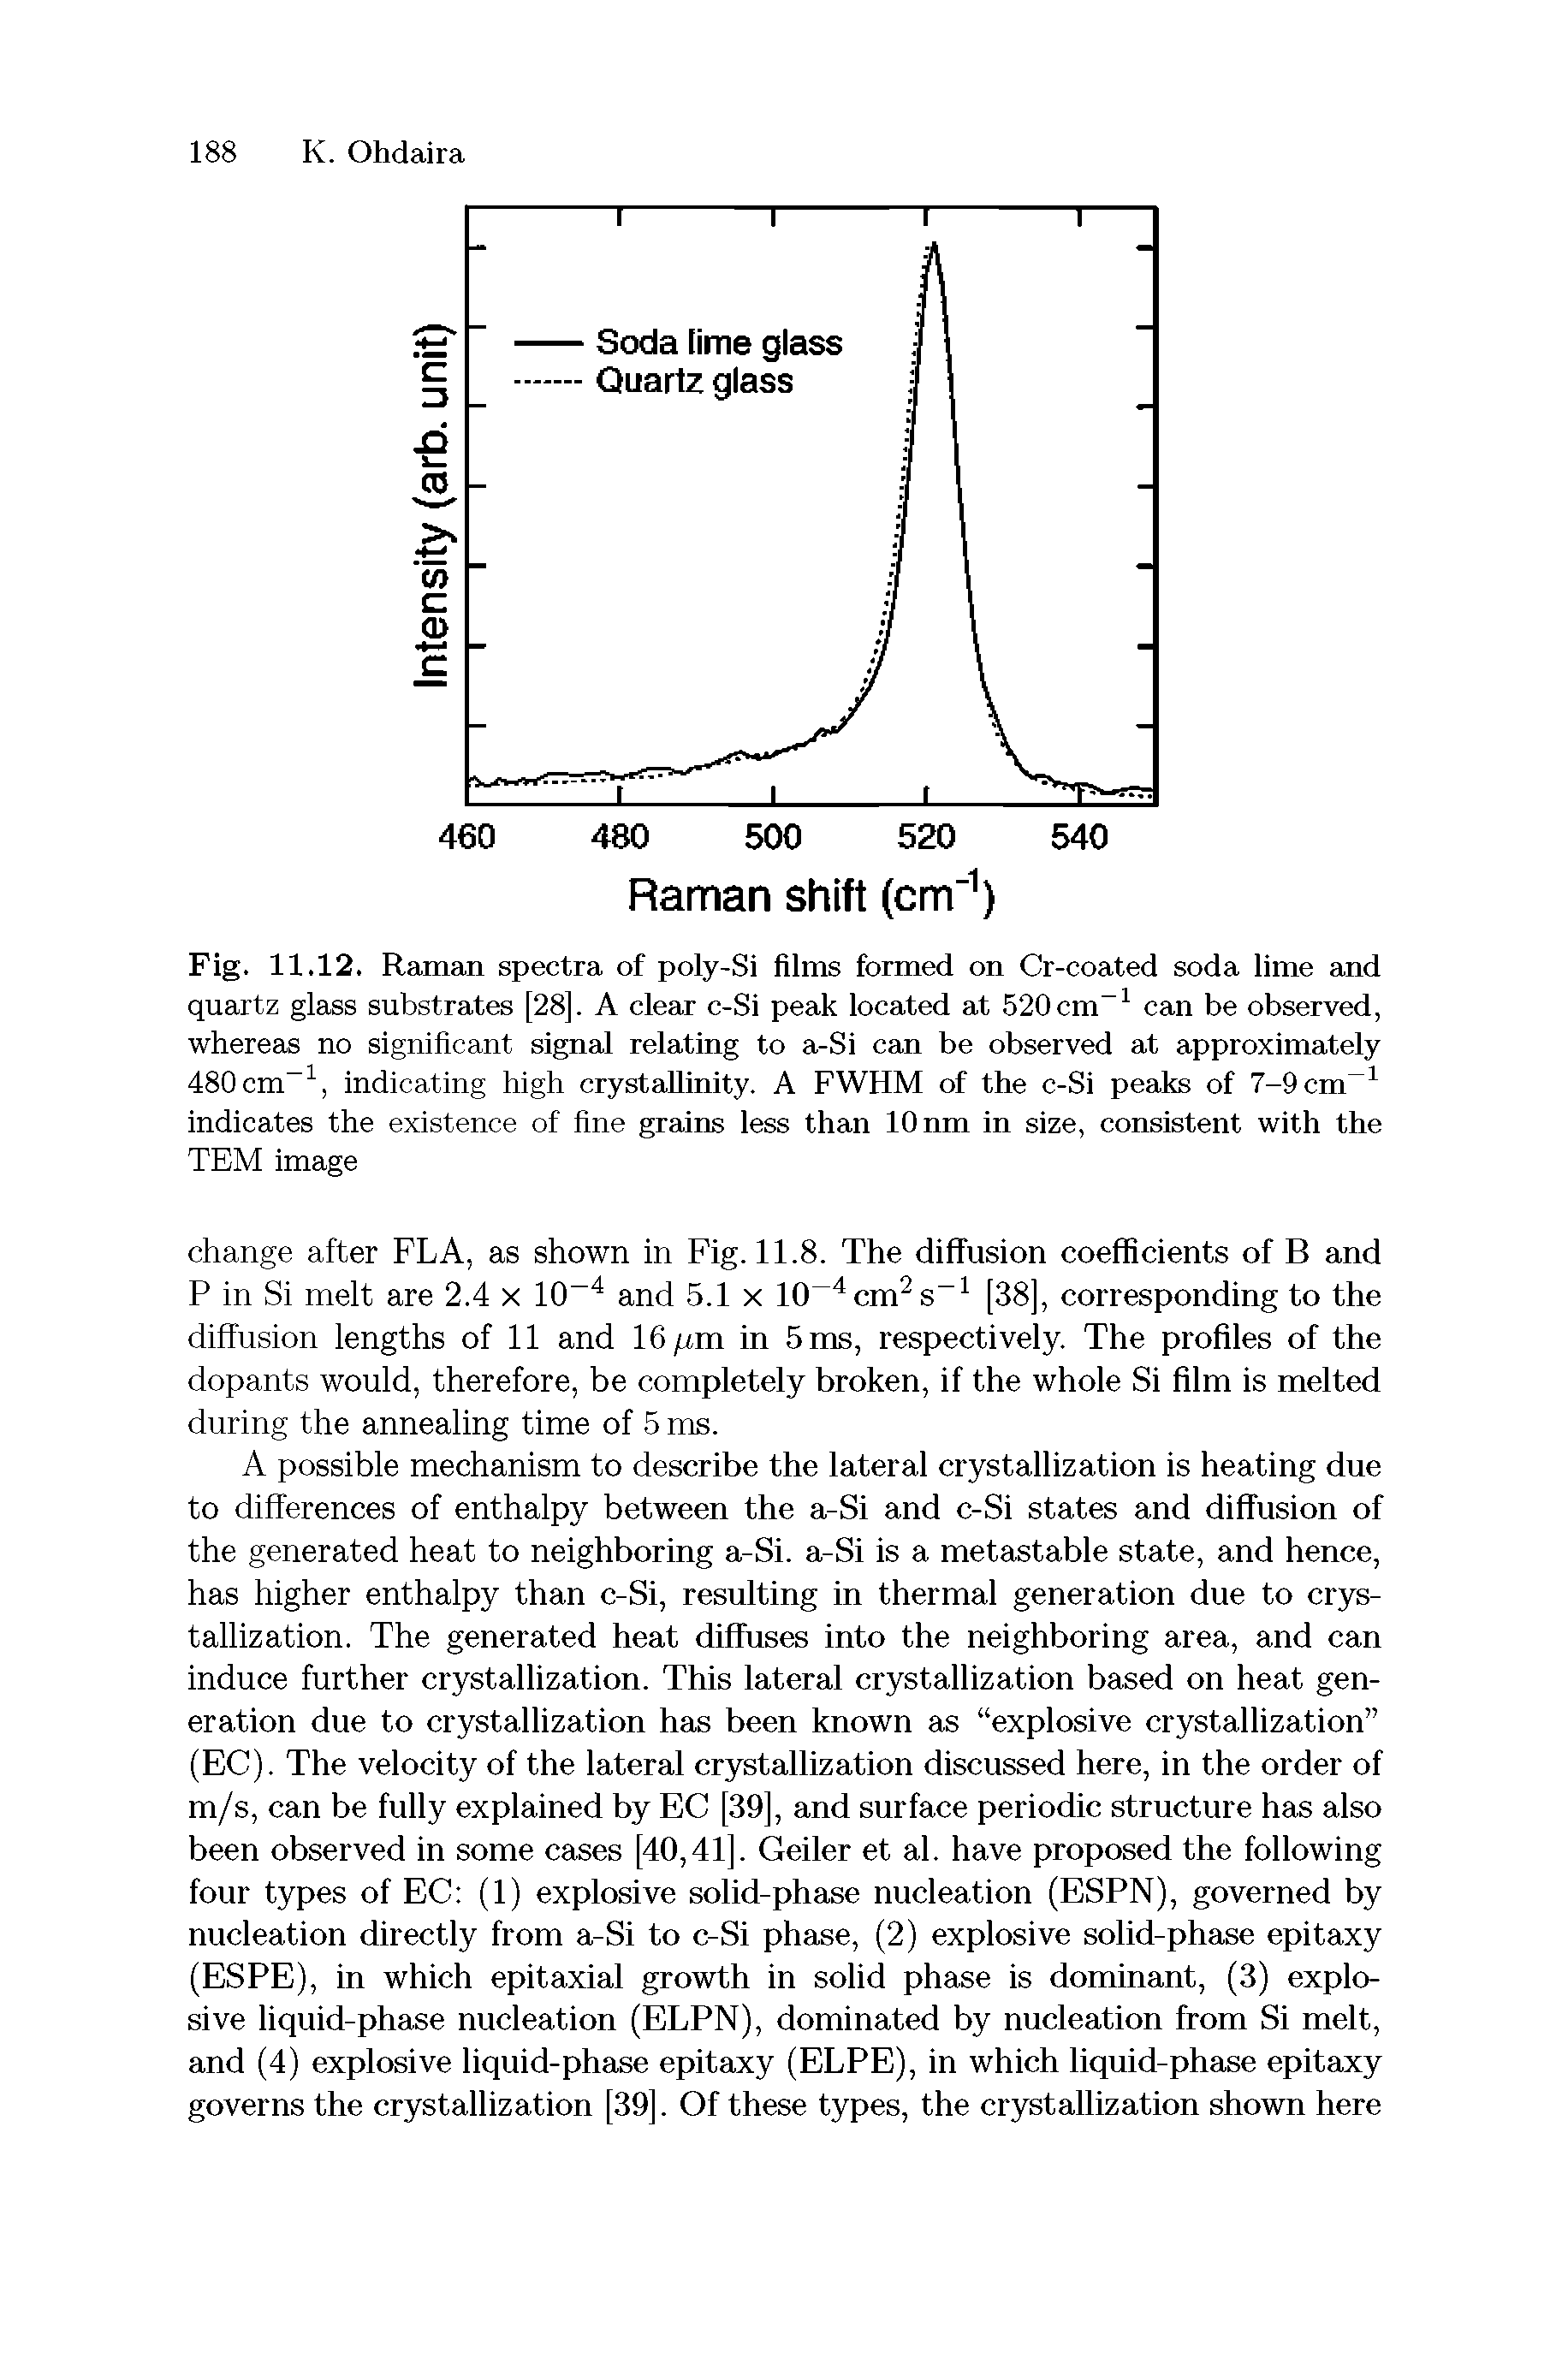 Fig. 11.12. Raman spectra of poly-Si films formed on Cr-coated soda lime and quartz glass substrates [28]. A clear c-Si peak located at 520 cm-1 can be observed, whereas no significant signal relating to a-Si can be observed at approximately 480 cm-1, indicating high crystallinity. A FWHM of the c-Si peaks of 7-9 cm-1 indicates the existence of fine grains less than 10 nm in size, consistent with the TEM image...